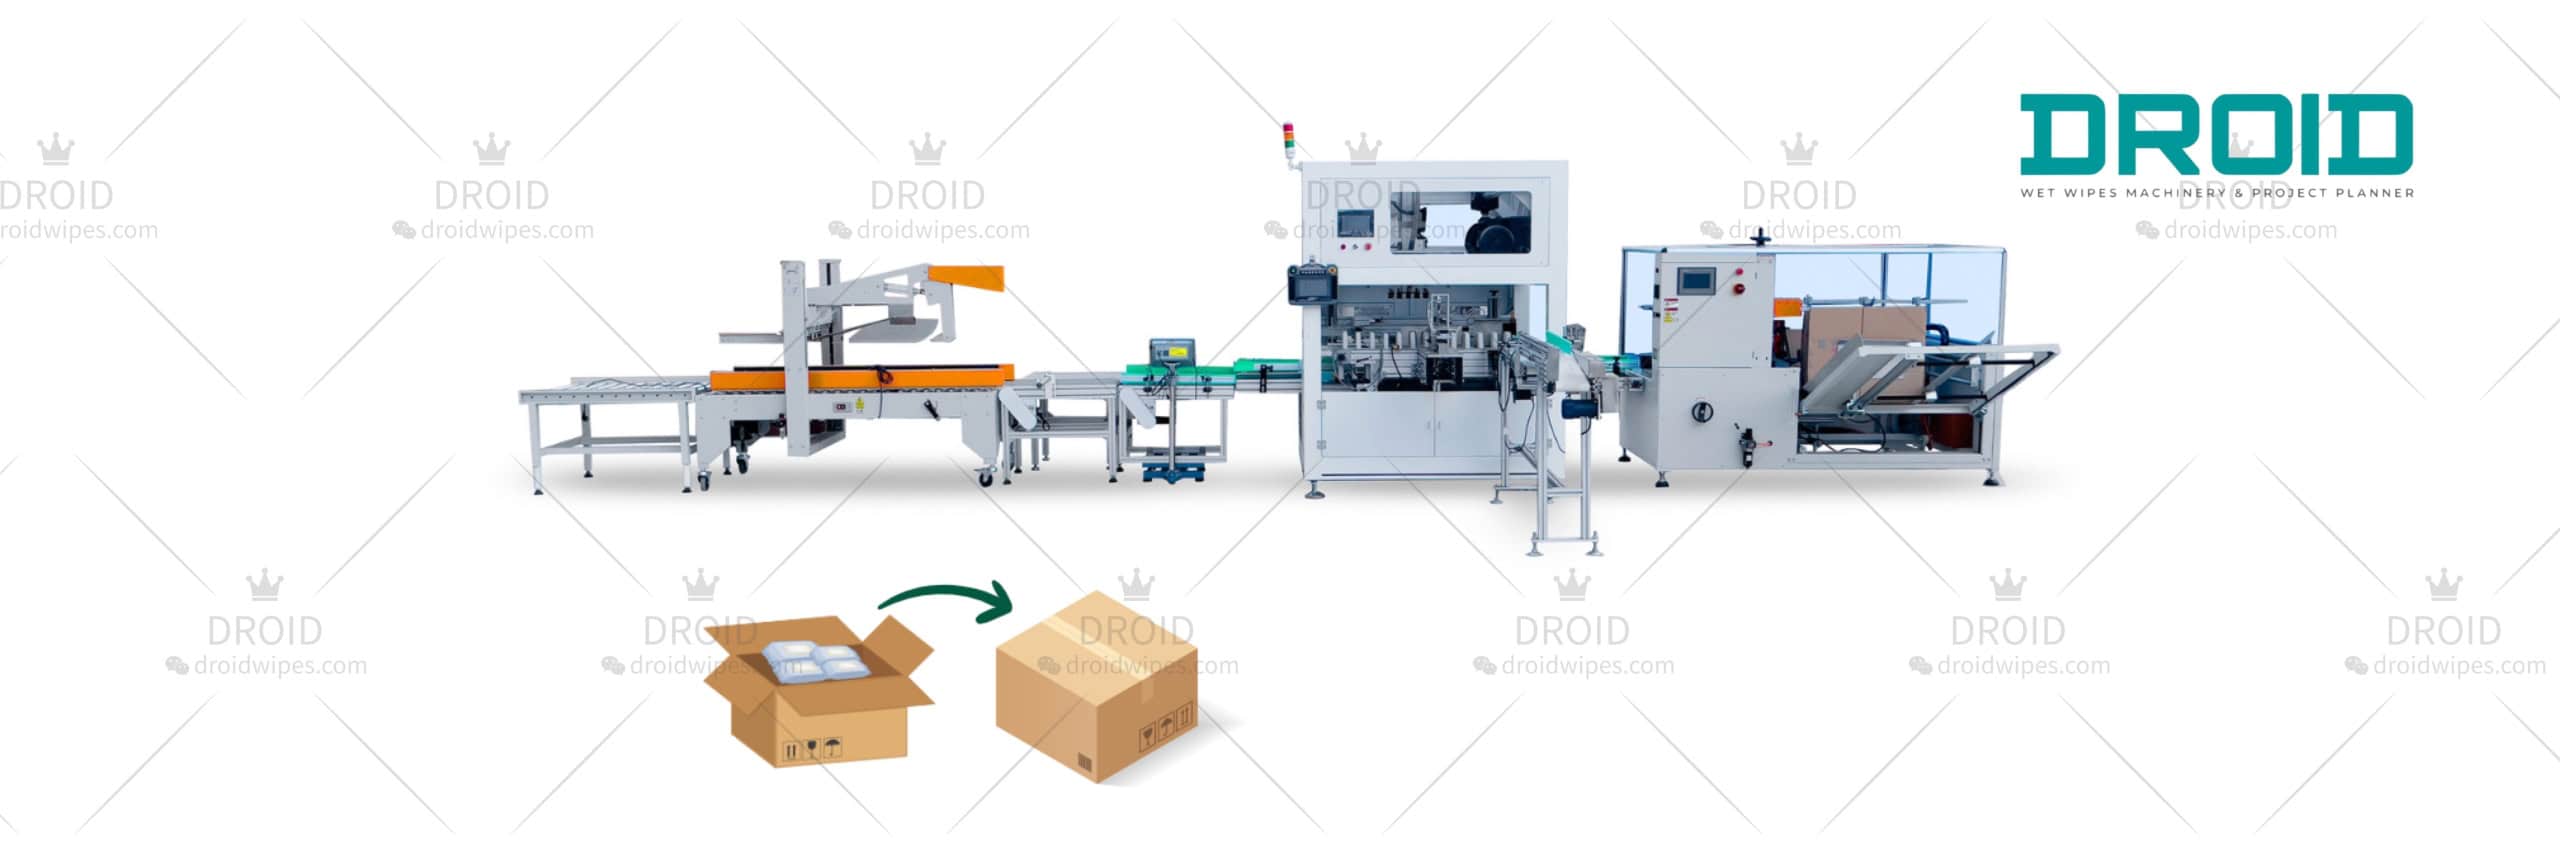 UT C300 Robotic Case Packer for Wet Wipes Production DROID  scaled - UT-LM70 Robotic Wet Wipes Lid Applicator ( Capping Machine )